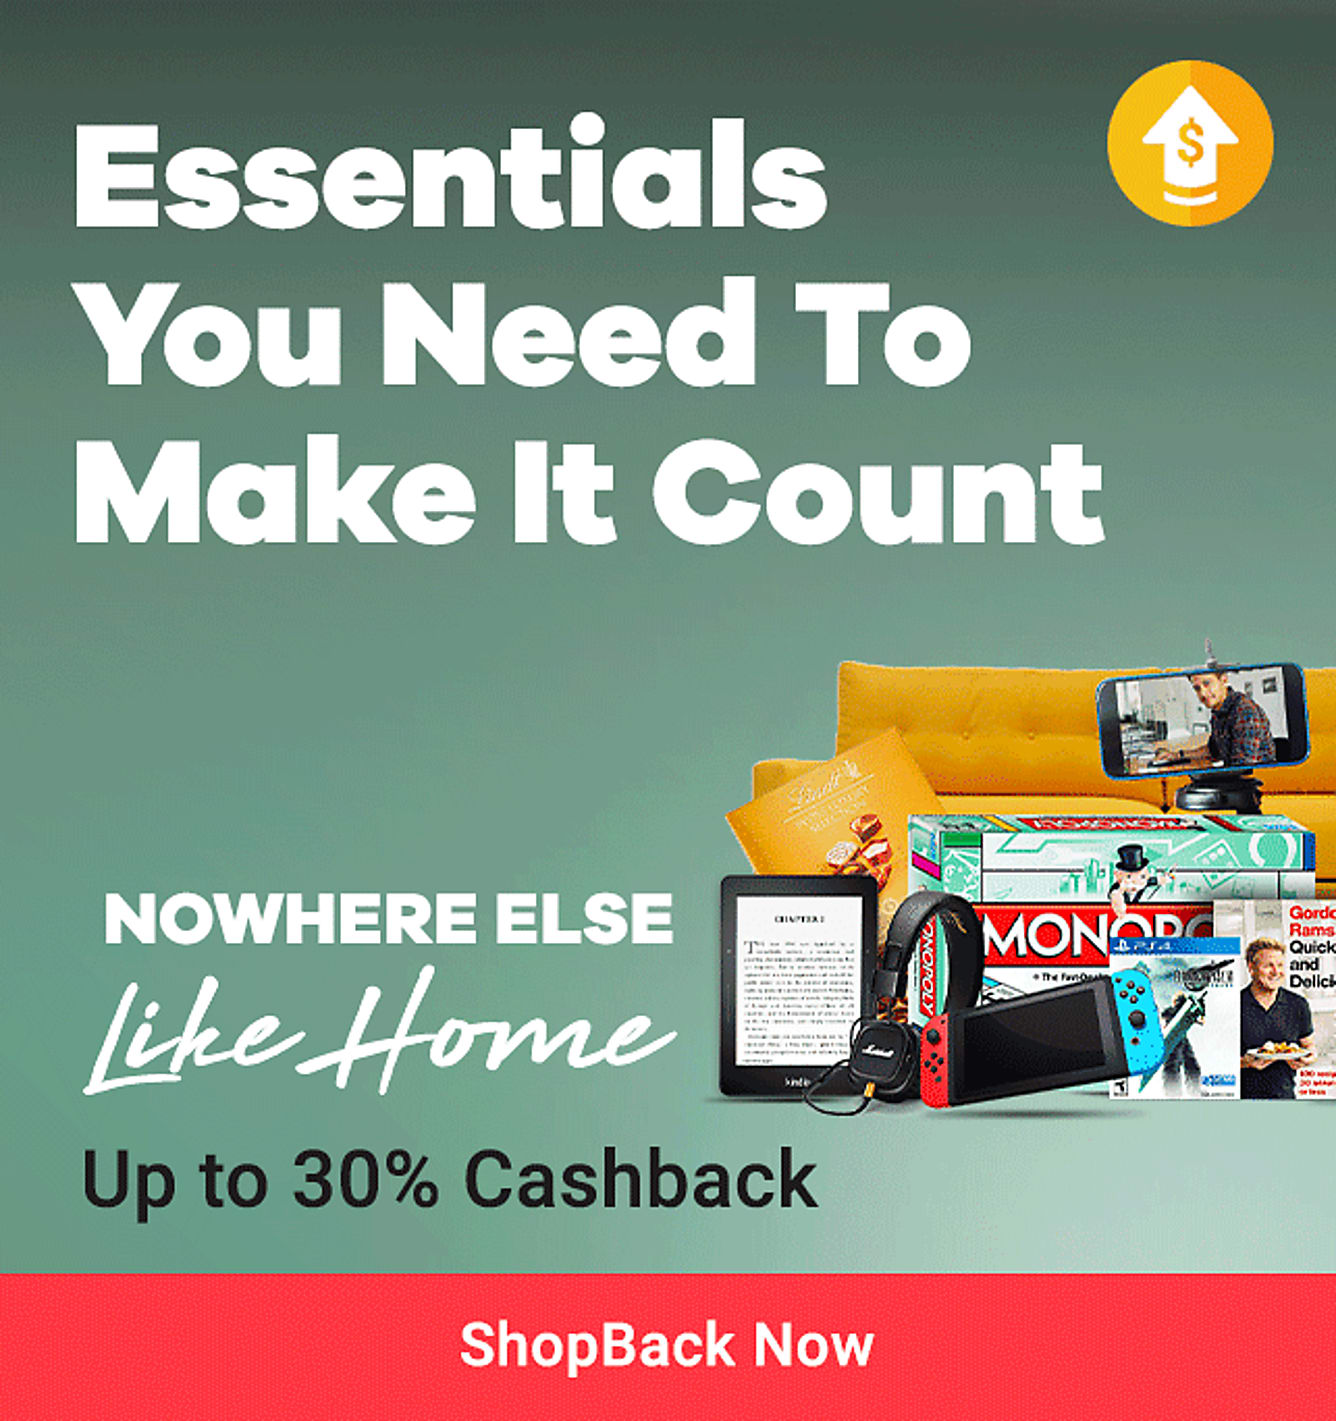 Stay Home Essentials Up to 30% Cashback